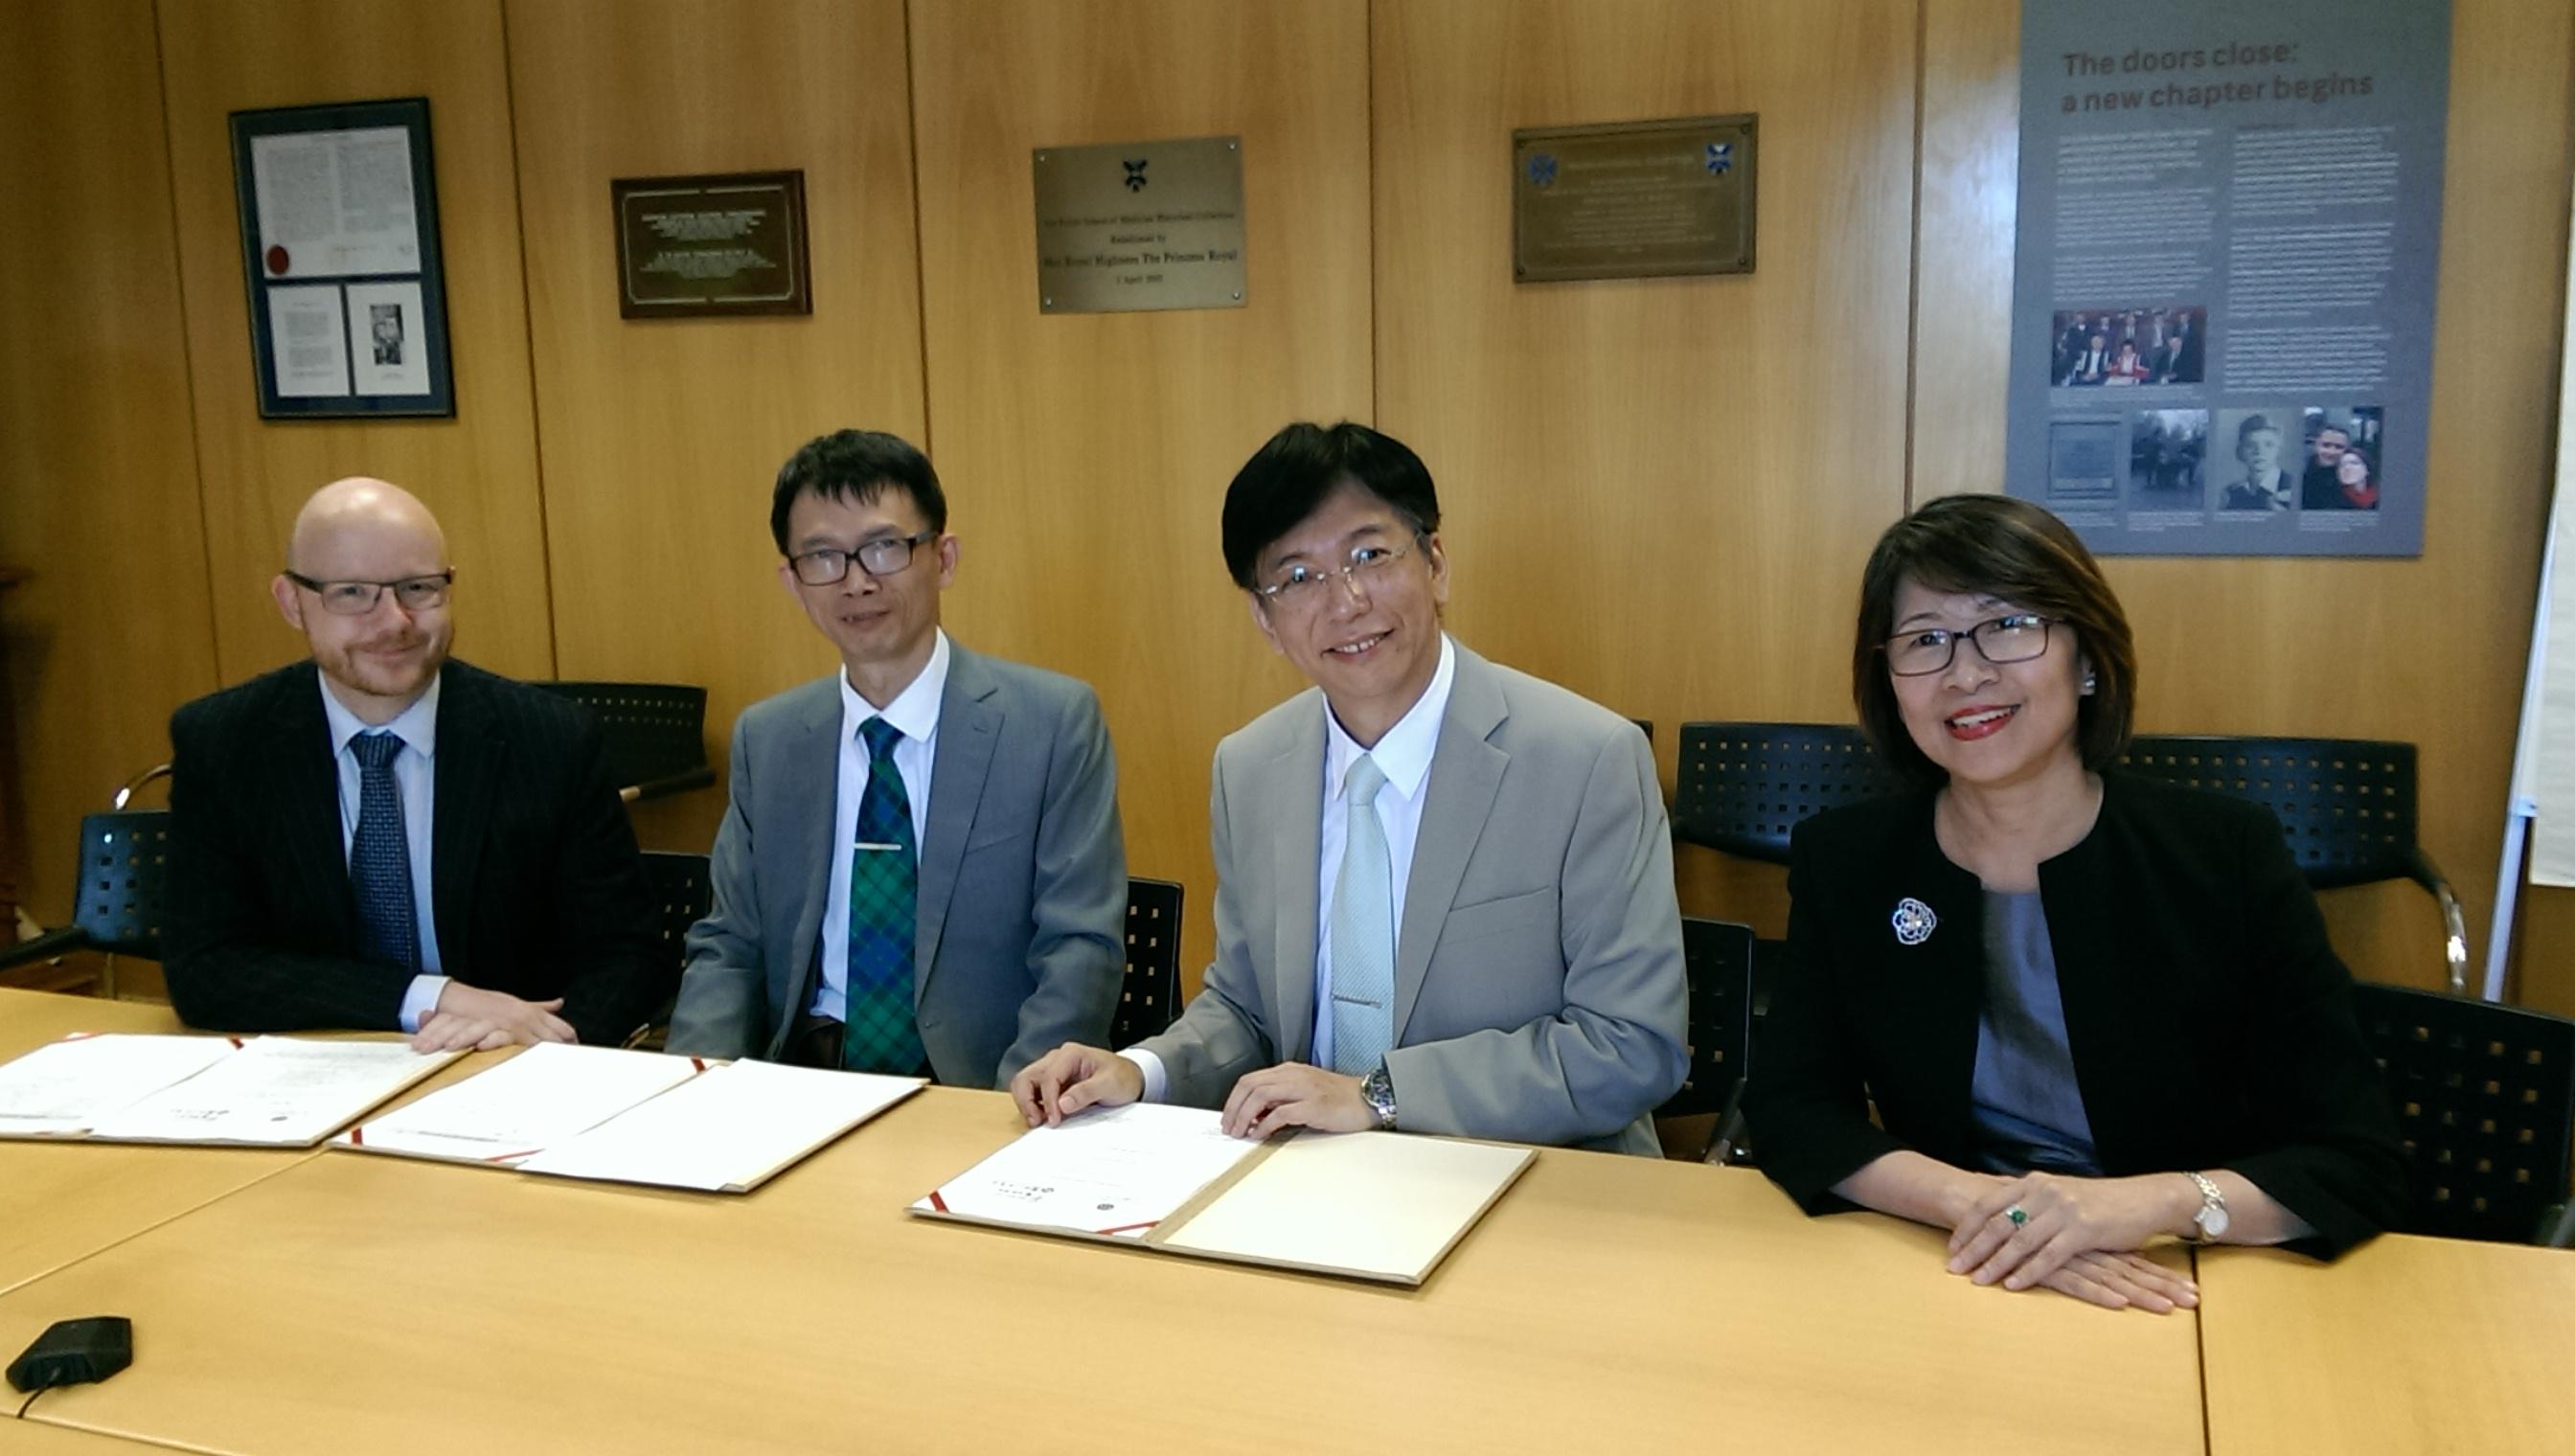 Mackay Memorial Hospital, Mackay Medical College and University of Edinburgh signed MoU on the 30th of August 2016 to promote cooperation in teaching, research, and service to the community through exchange of students, staff and knowledge.